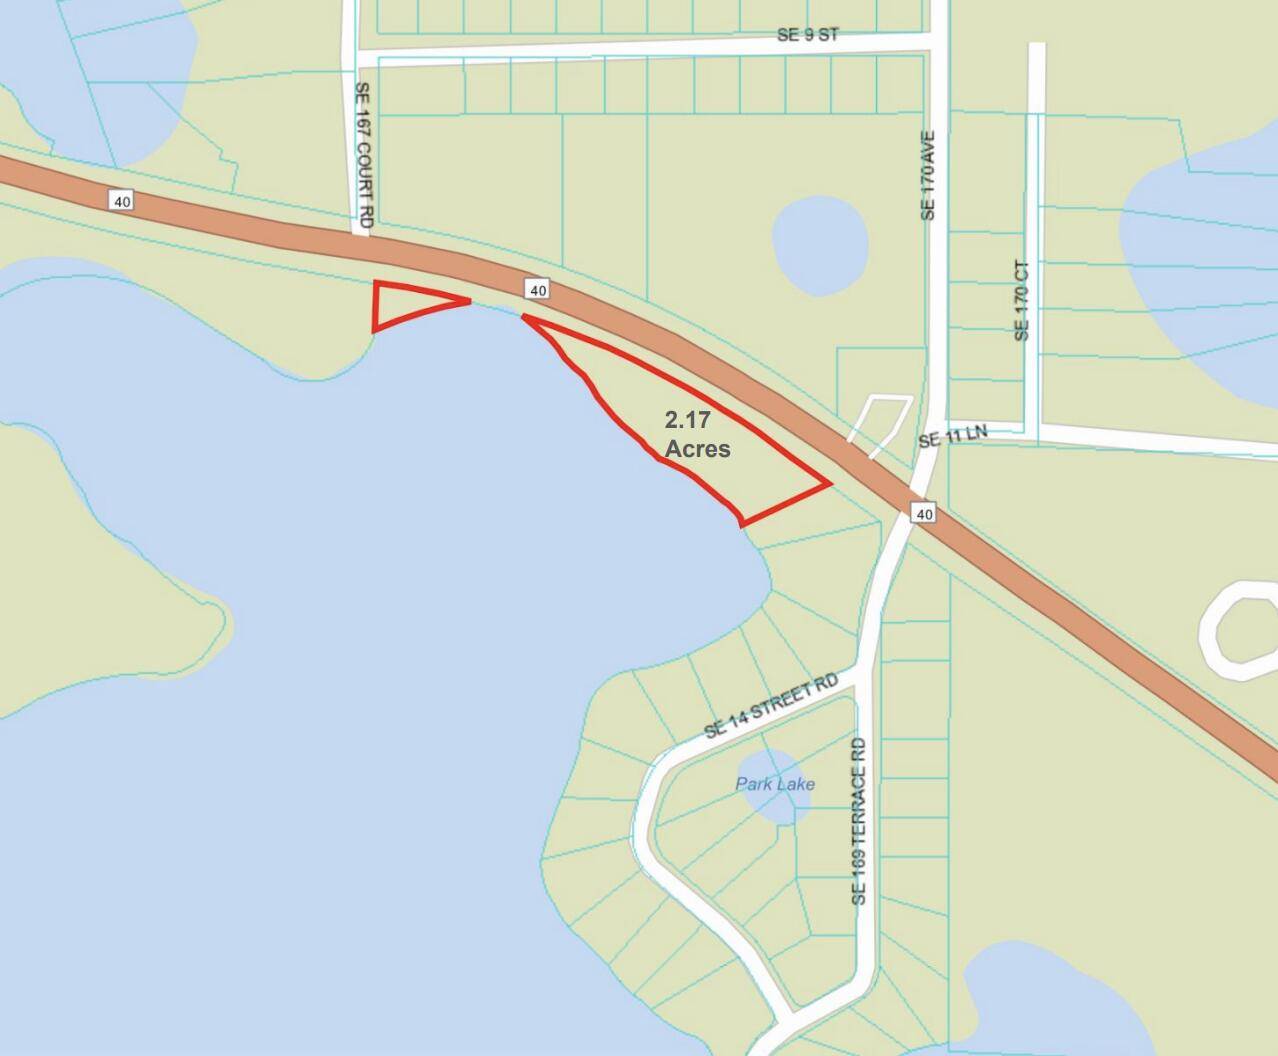 Just over two acres of lakefront commercial property located off Highway 40 in rapidly expanding Marion County, Florida.